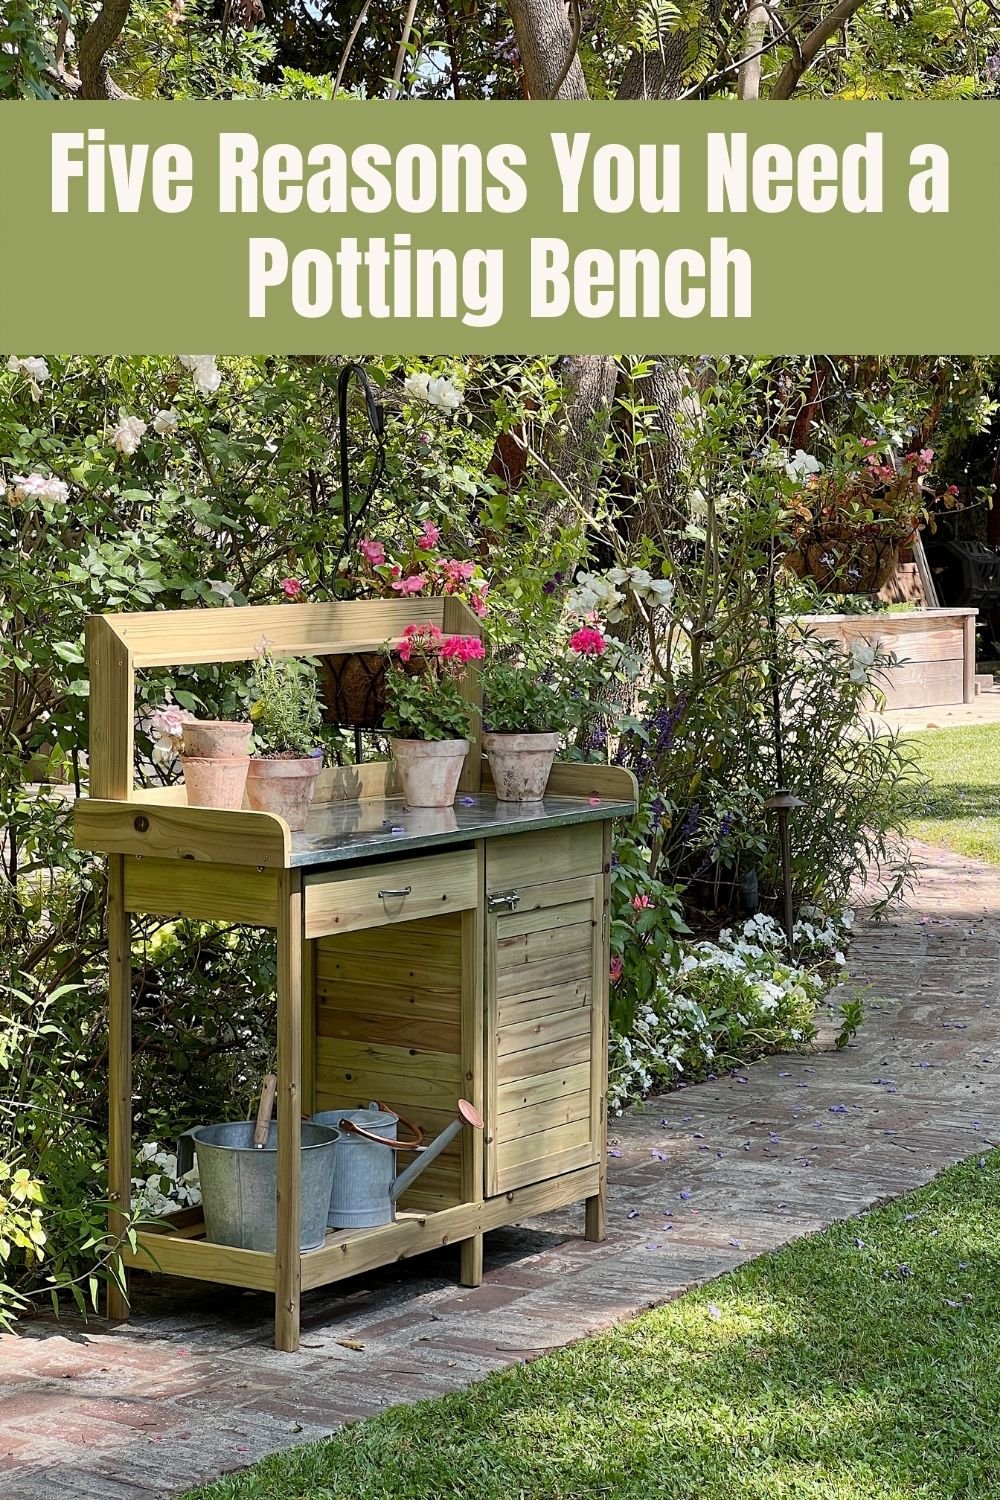 When it comes to gardening, a potting bench is a must-have. Today, I will be sharing five reasons why you need a potting bench in your life.